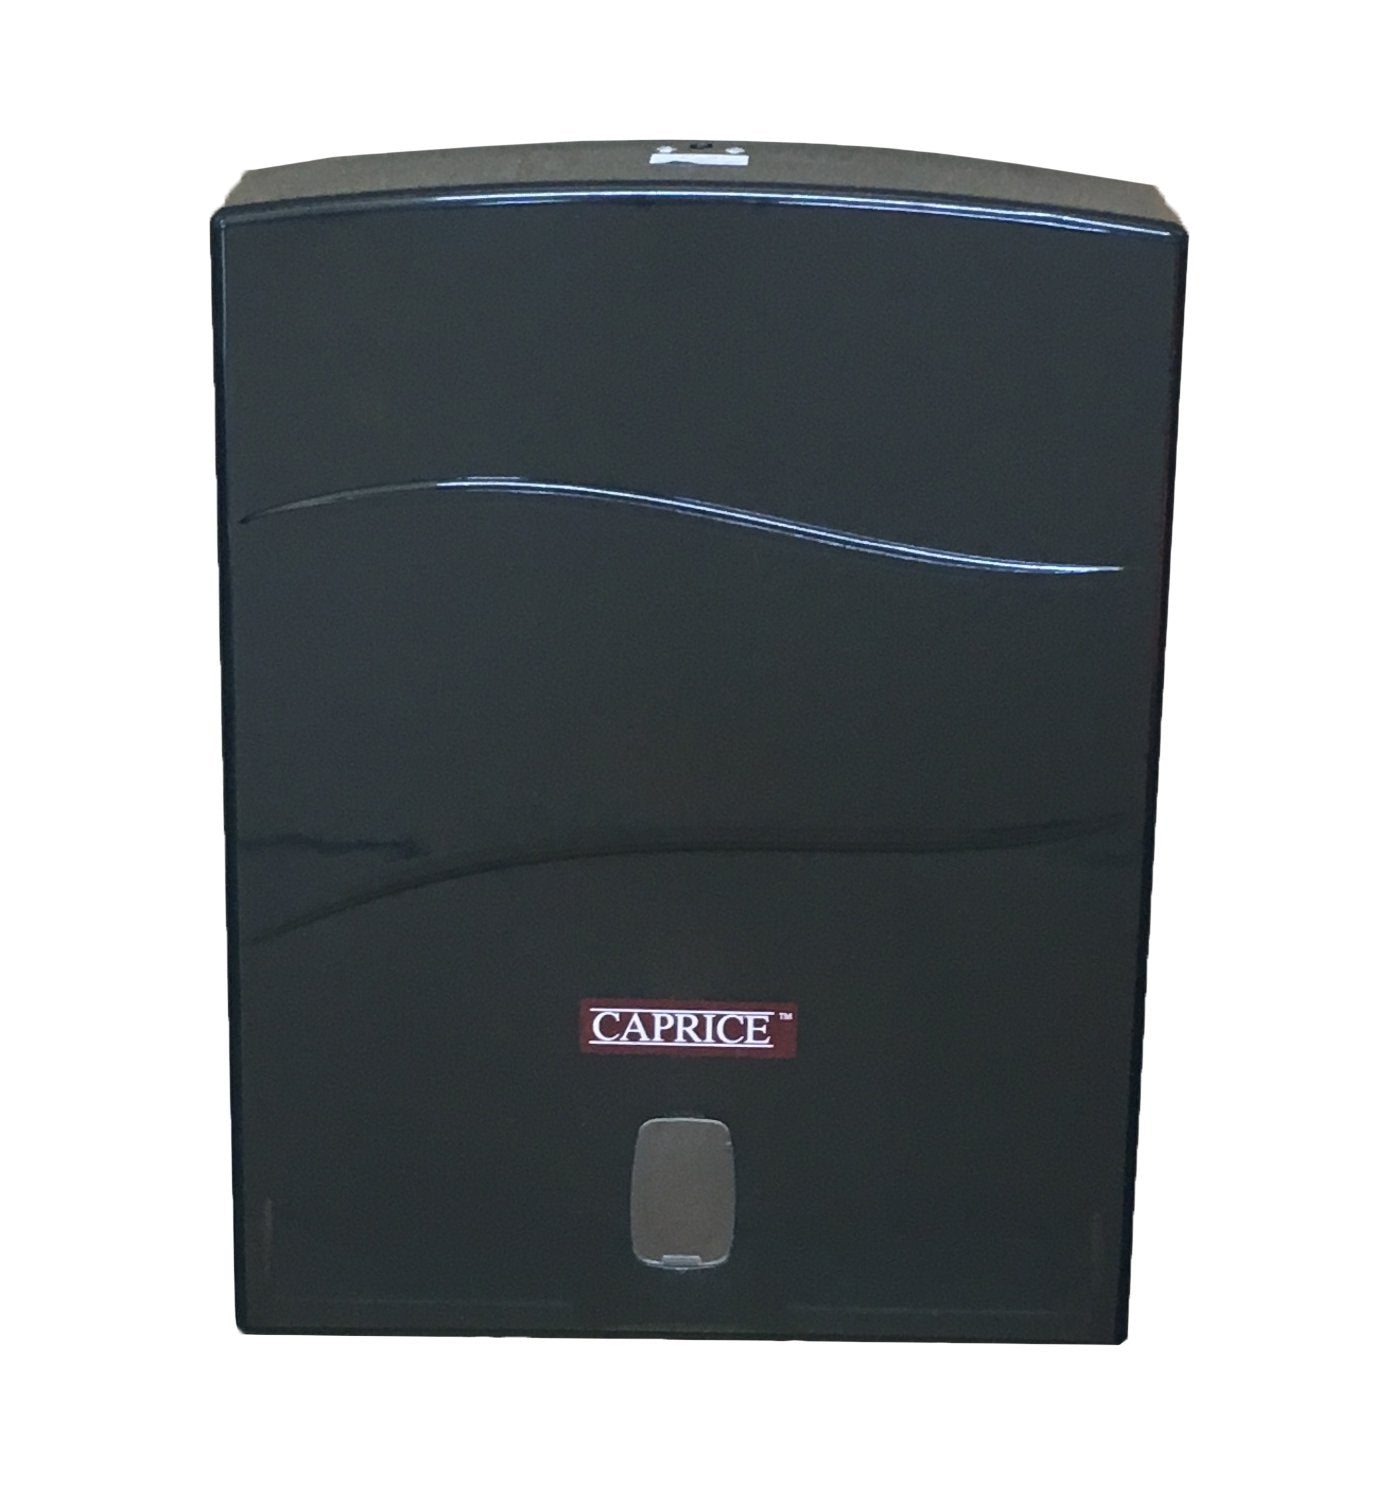 Caprice | Caprice Interleaved Hand Towel Dispenser White or Black | Crystalwhite Cleaning Supplies Melbourne